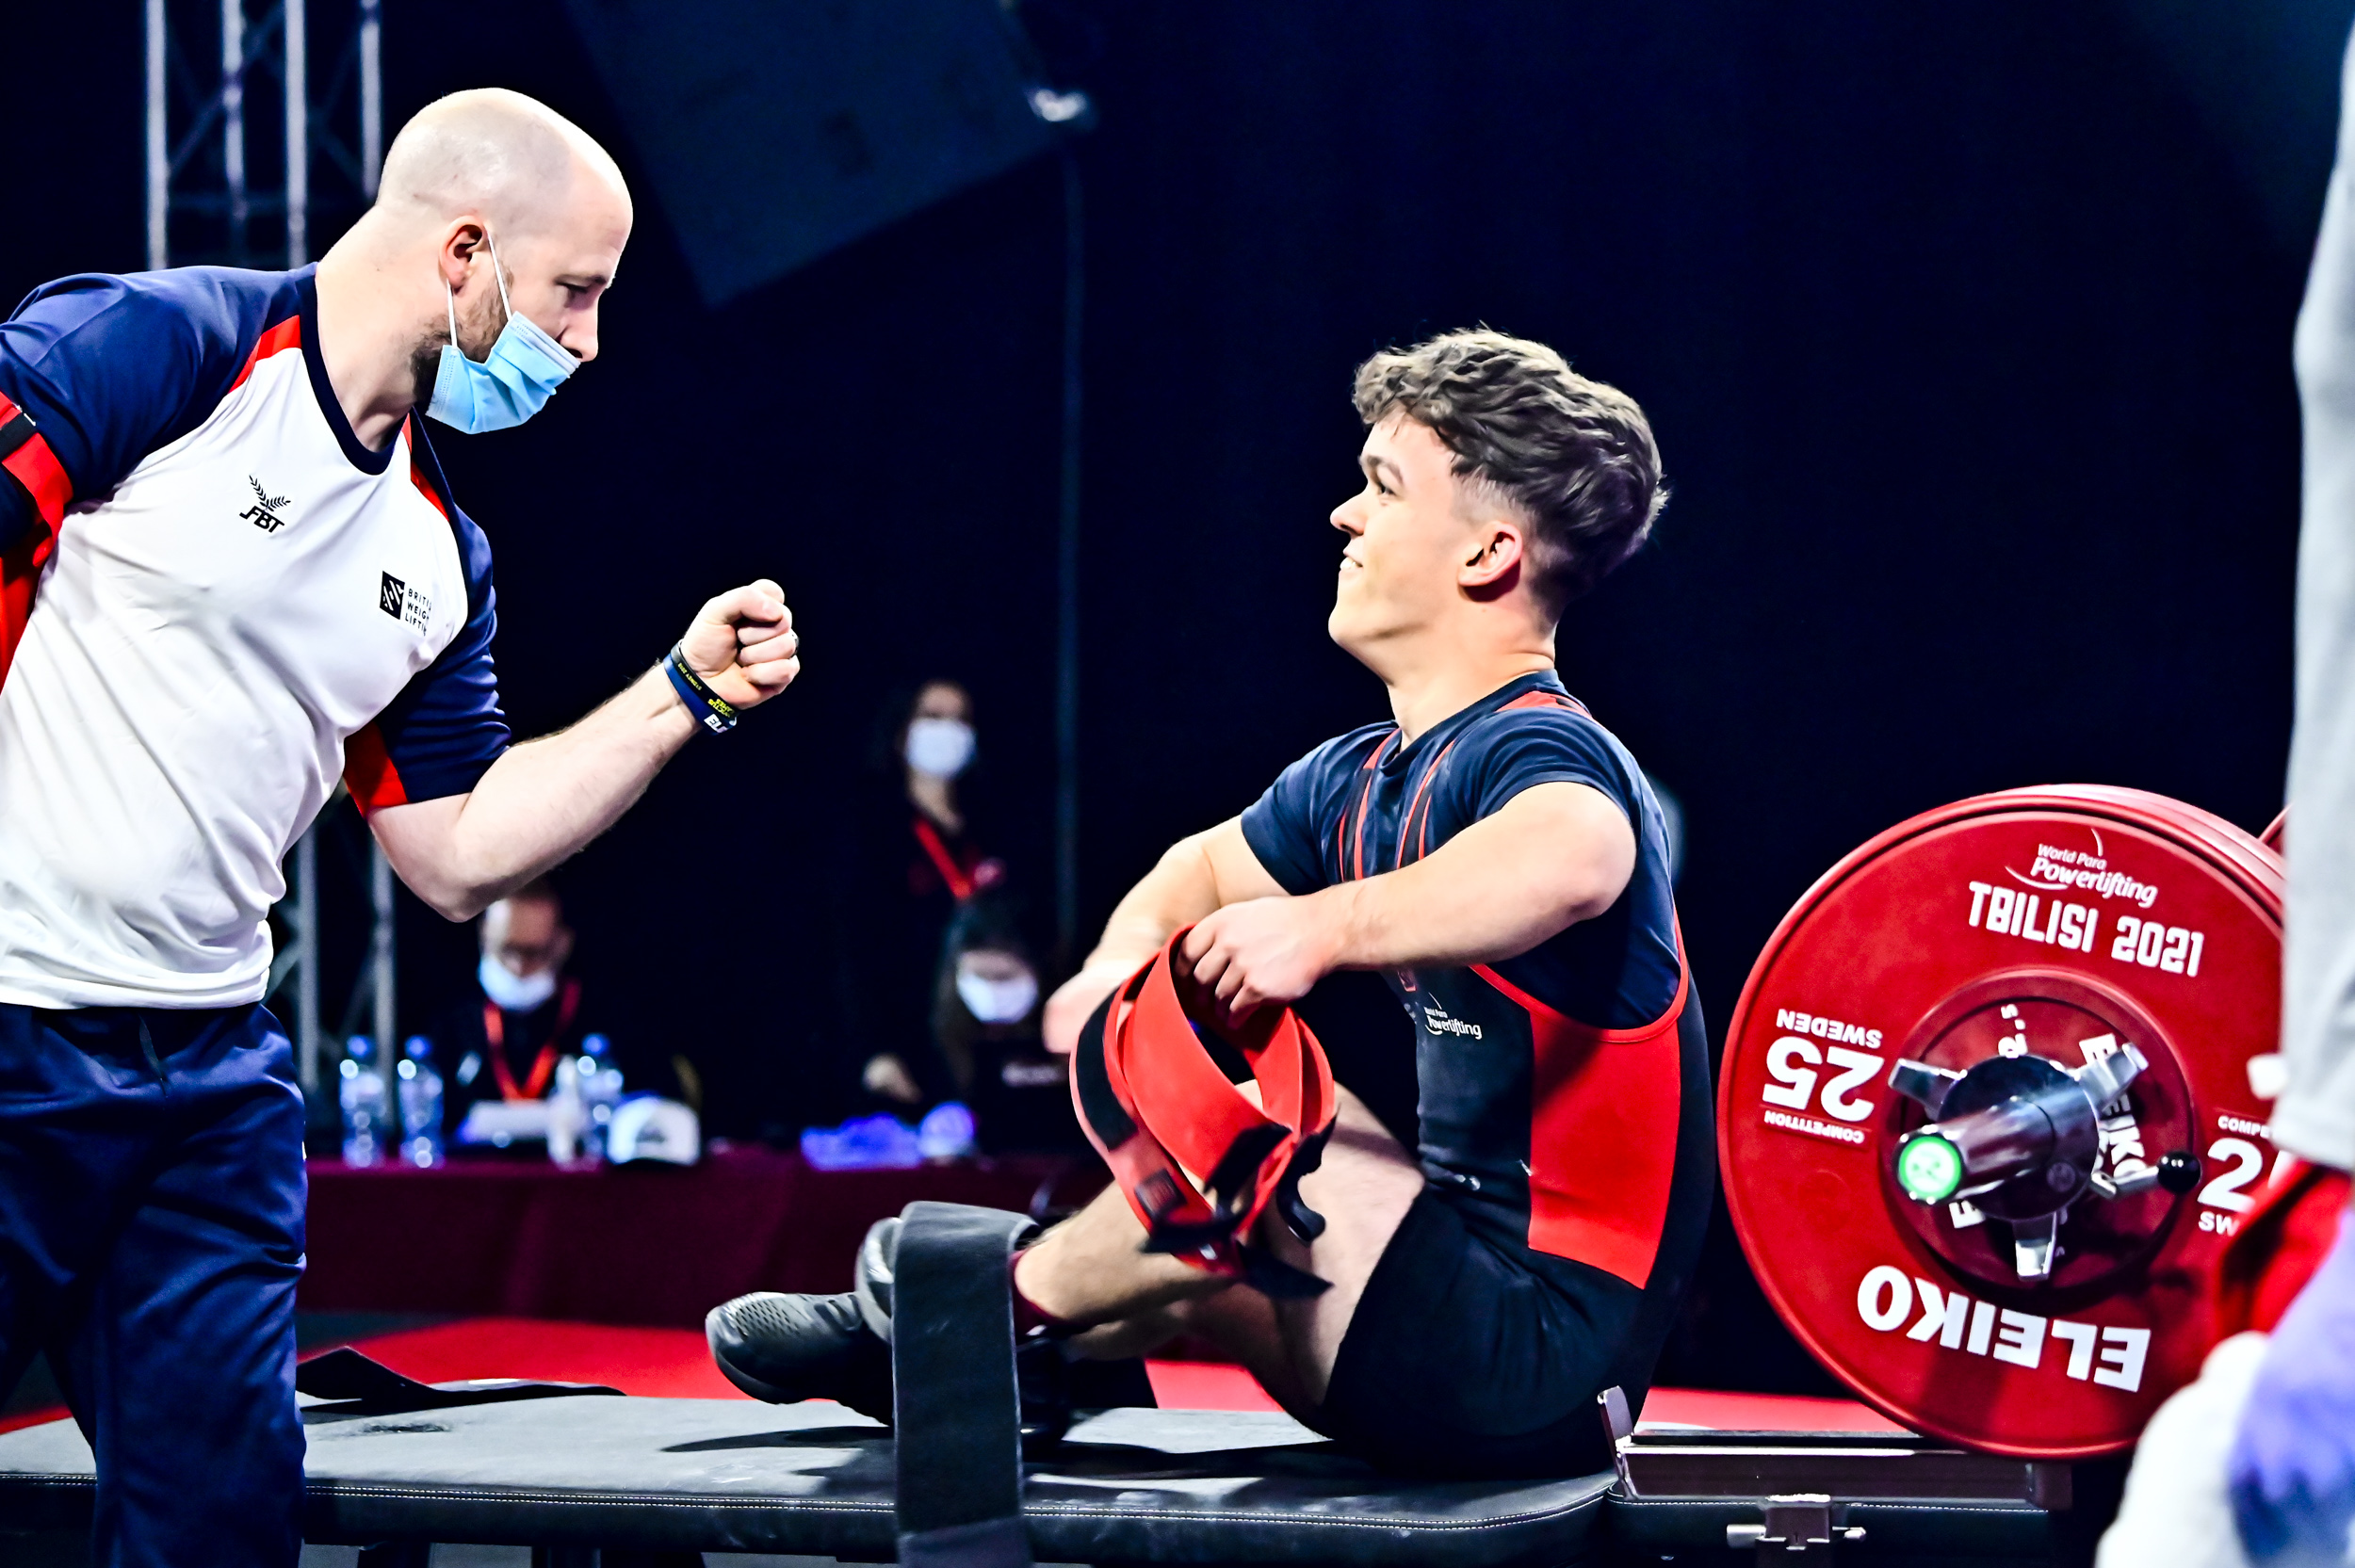 Outstanding performances at the World Para Powerlifting Championships